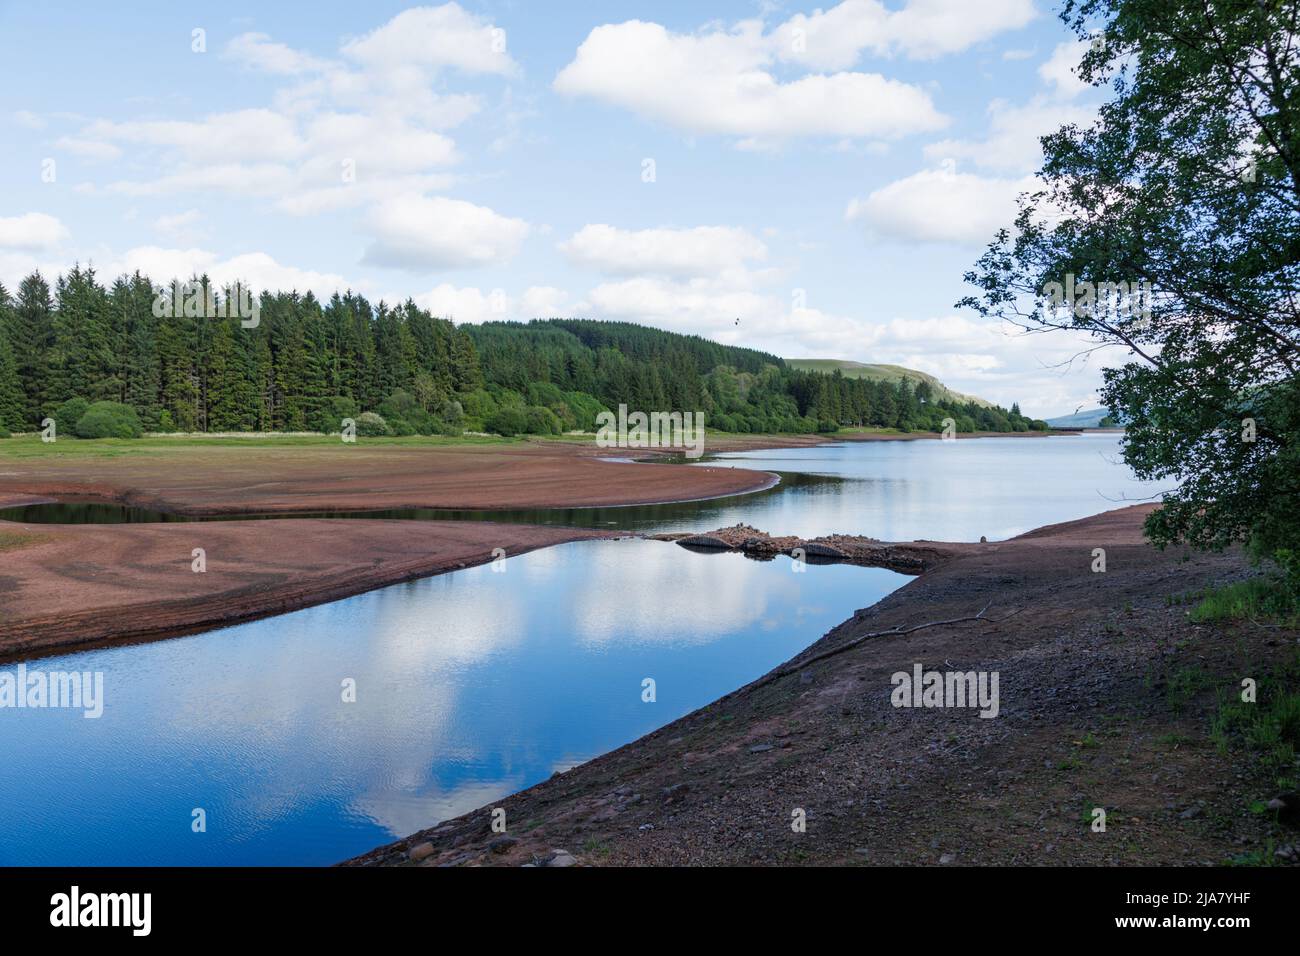 Llwyn Onn Reservoir, Merthyr Tydifl, South Wales, UK.  28 May 2022.  UK weather: Sunny afternoon over the reservoir today.  Water levels are lower than normal, and partially uncovered Pont Yr Daf bridge that was in use before the reservoir was constructed.  Credit: Andrew Bartlett/Alamy Live News. Stock Photo